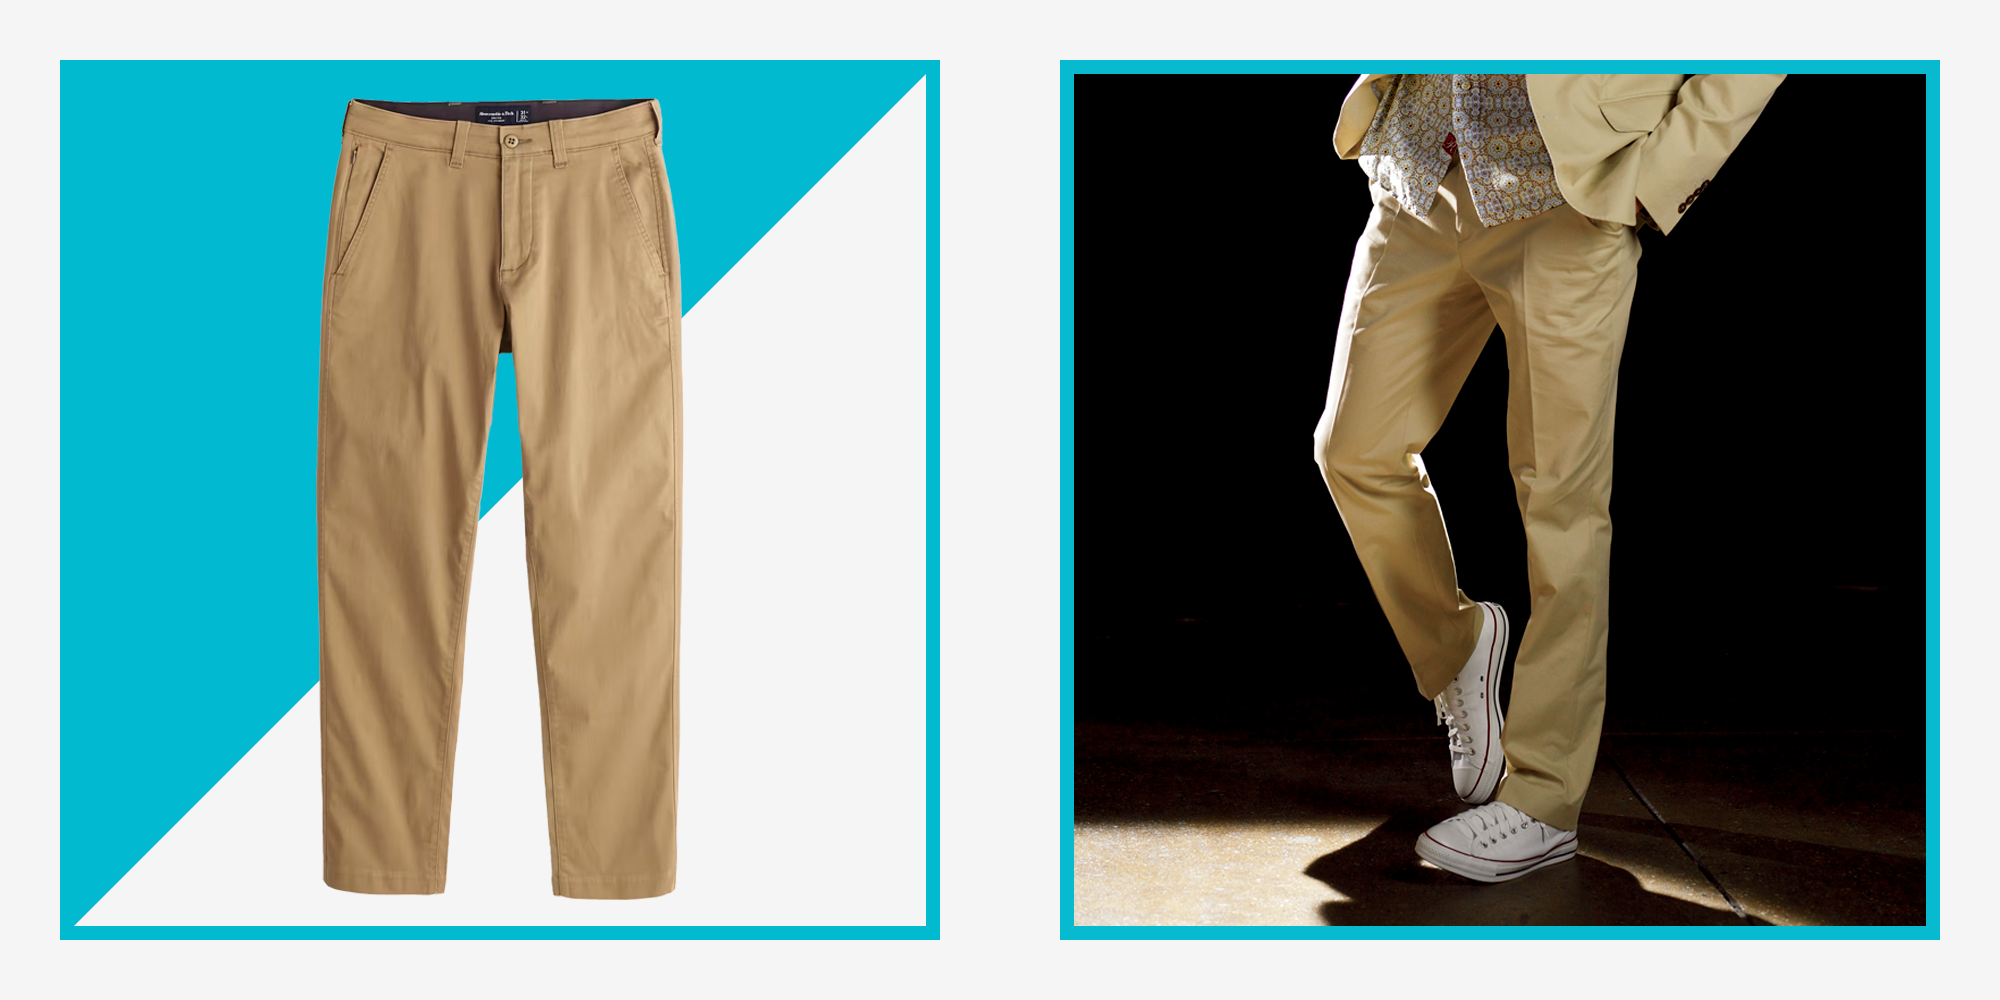 Khaki Pants Are Cool Again. Here Are the 20 Best Pairs to Buy.